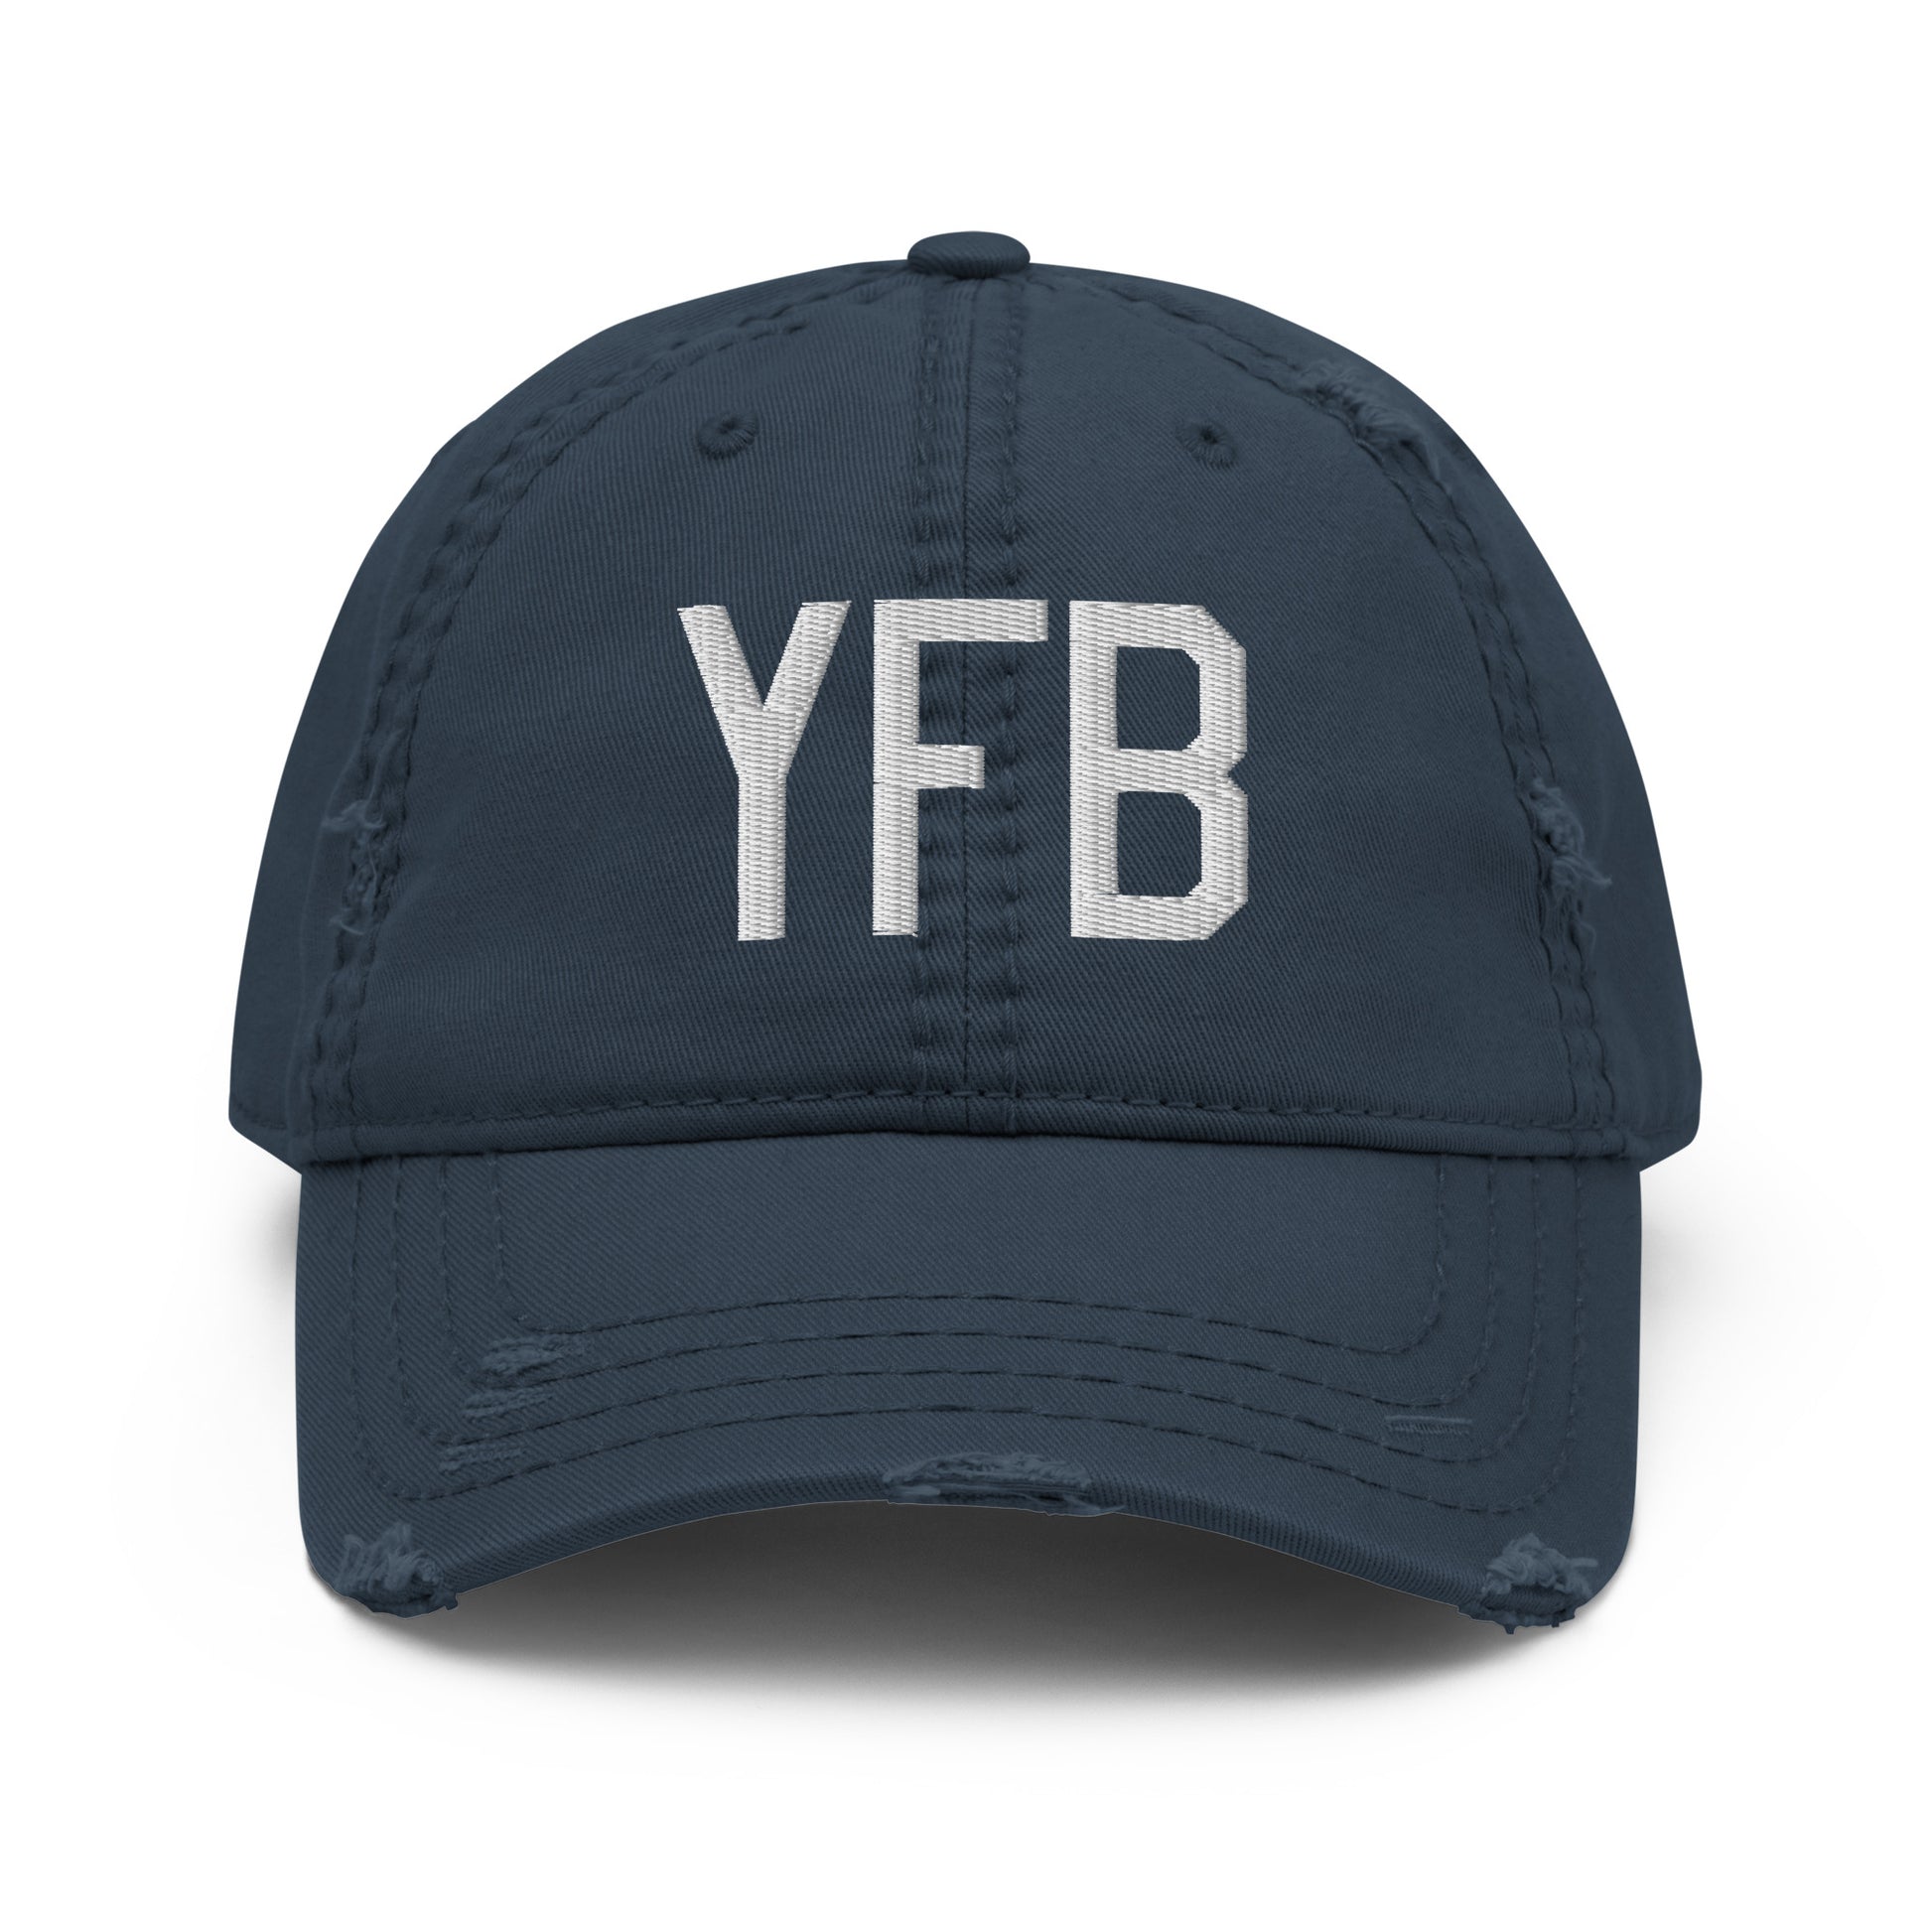 Airport Code Distressed Hat - White • YFB Iqaluit • YHM Designs - Image 13